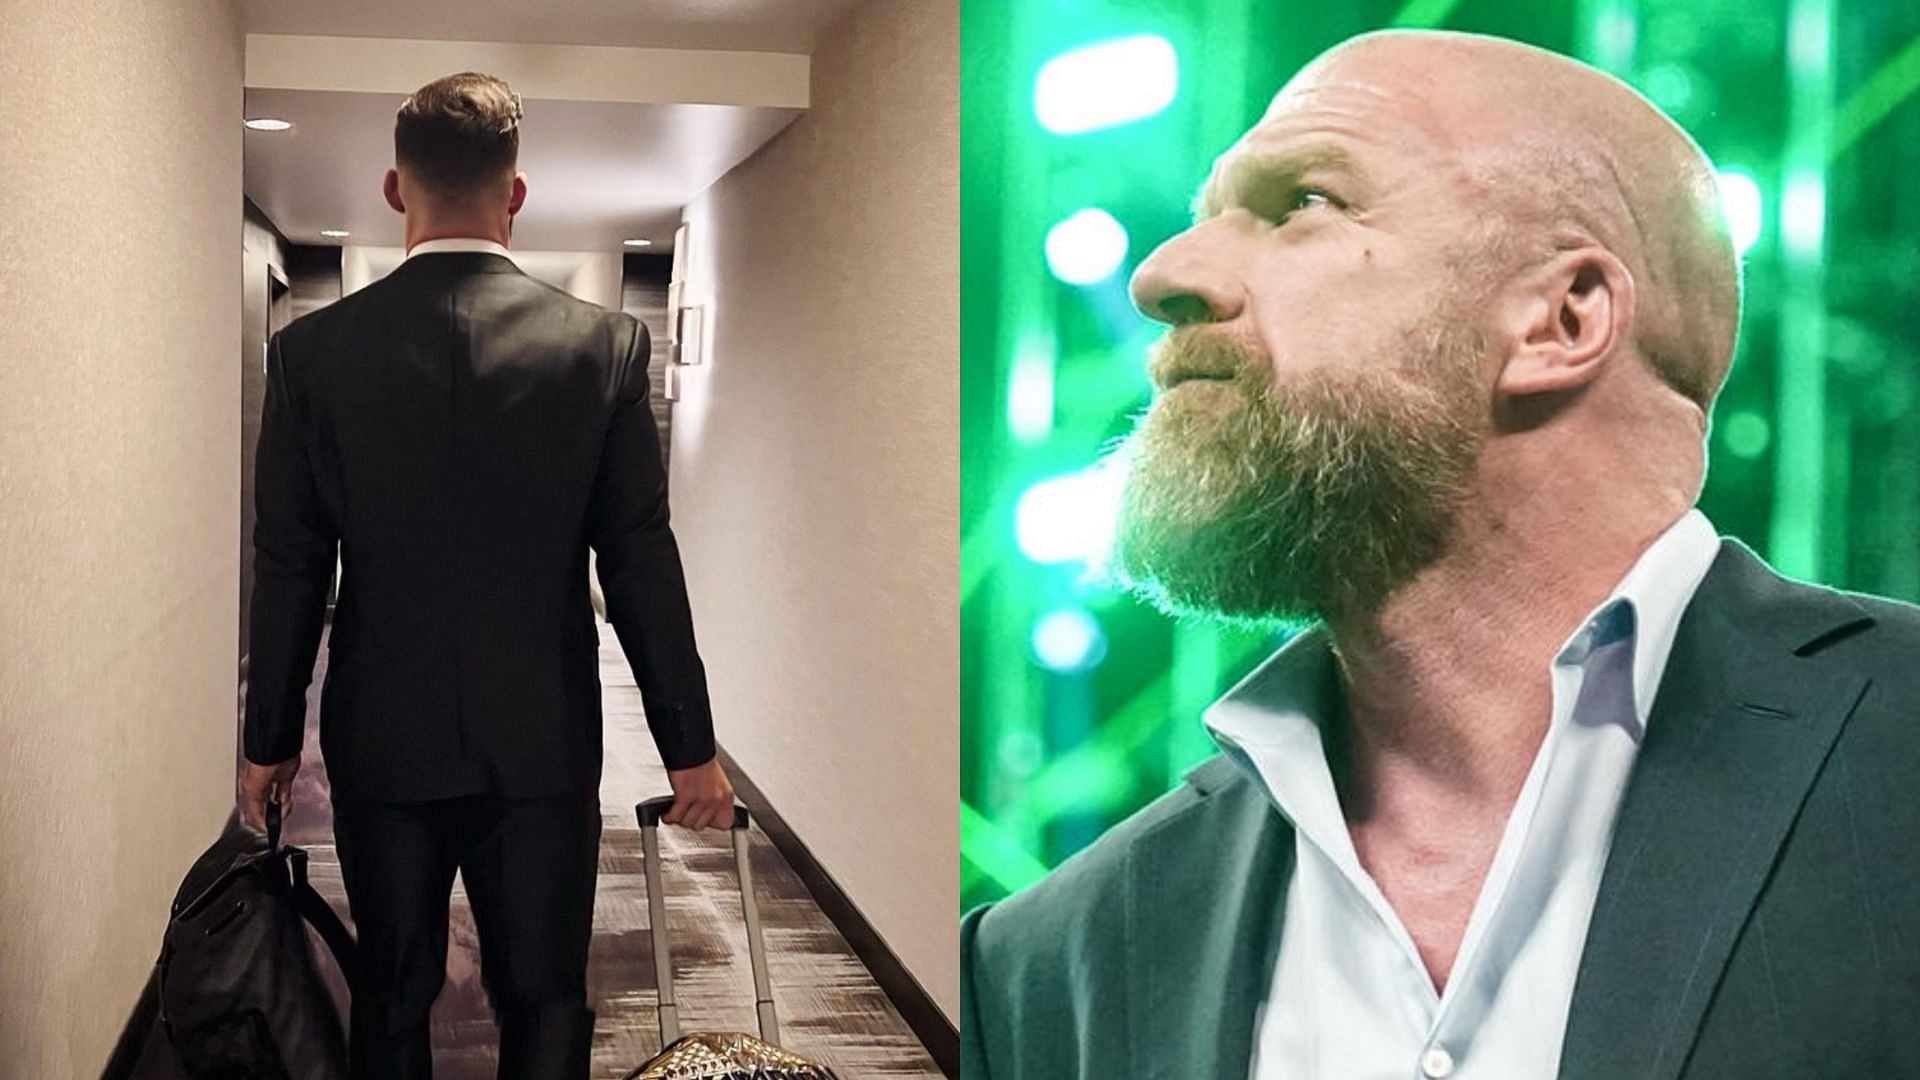 Will WWE CCO Triple H push Austin Theory to become the face of the company?